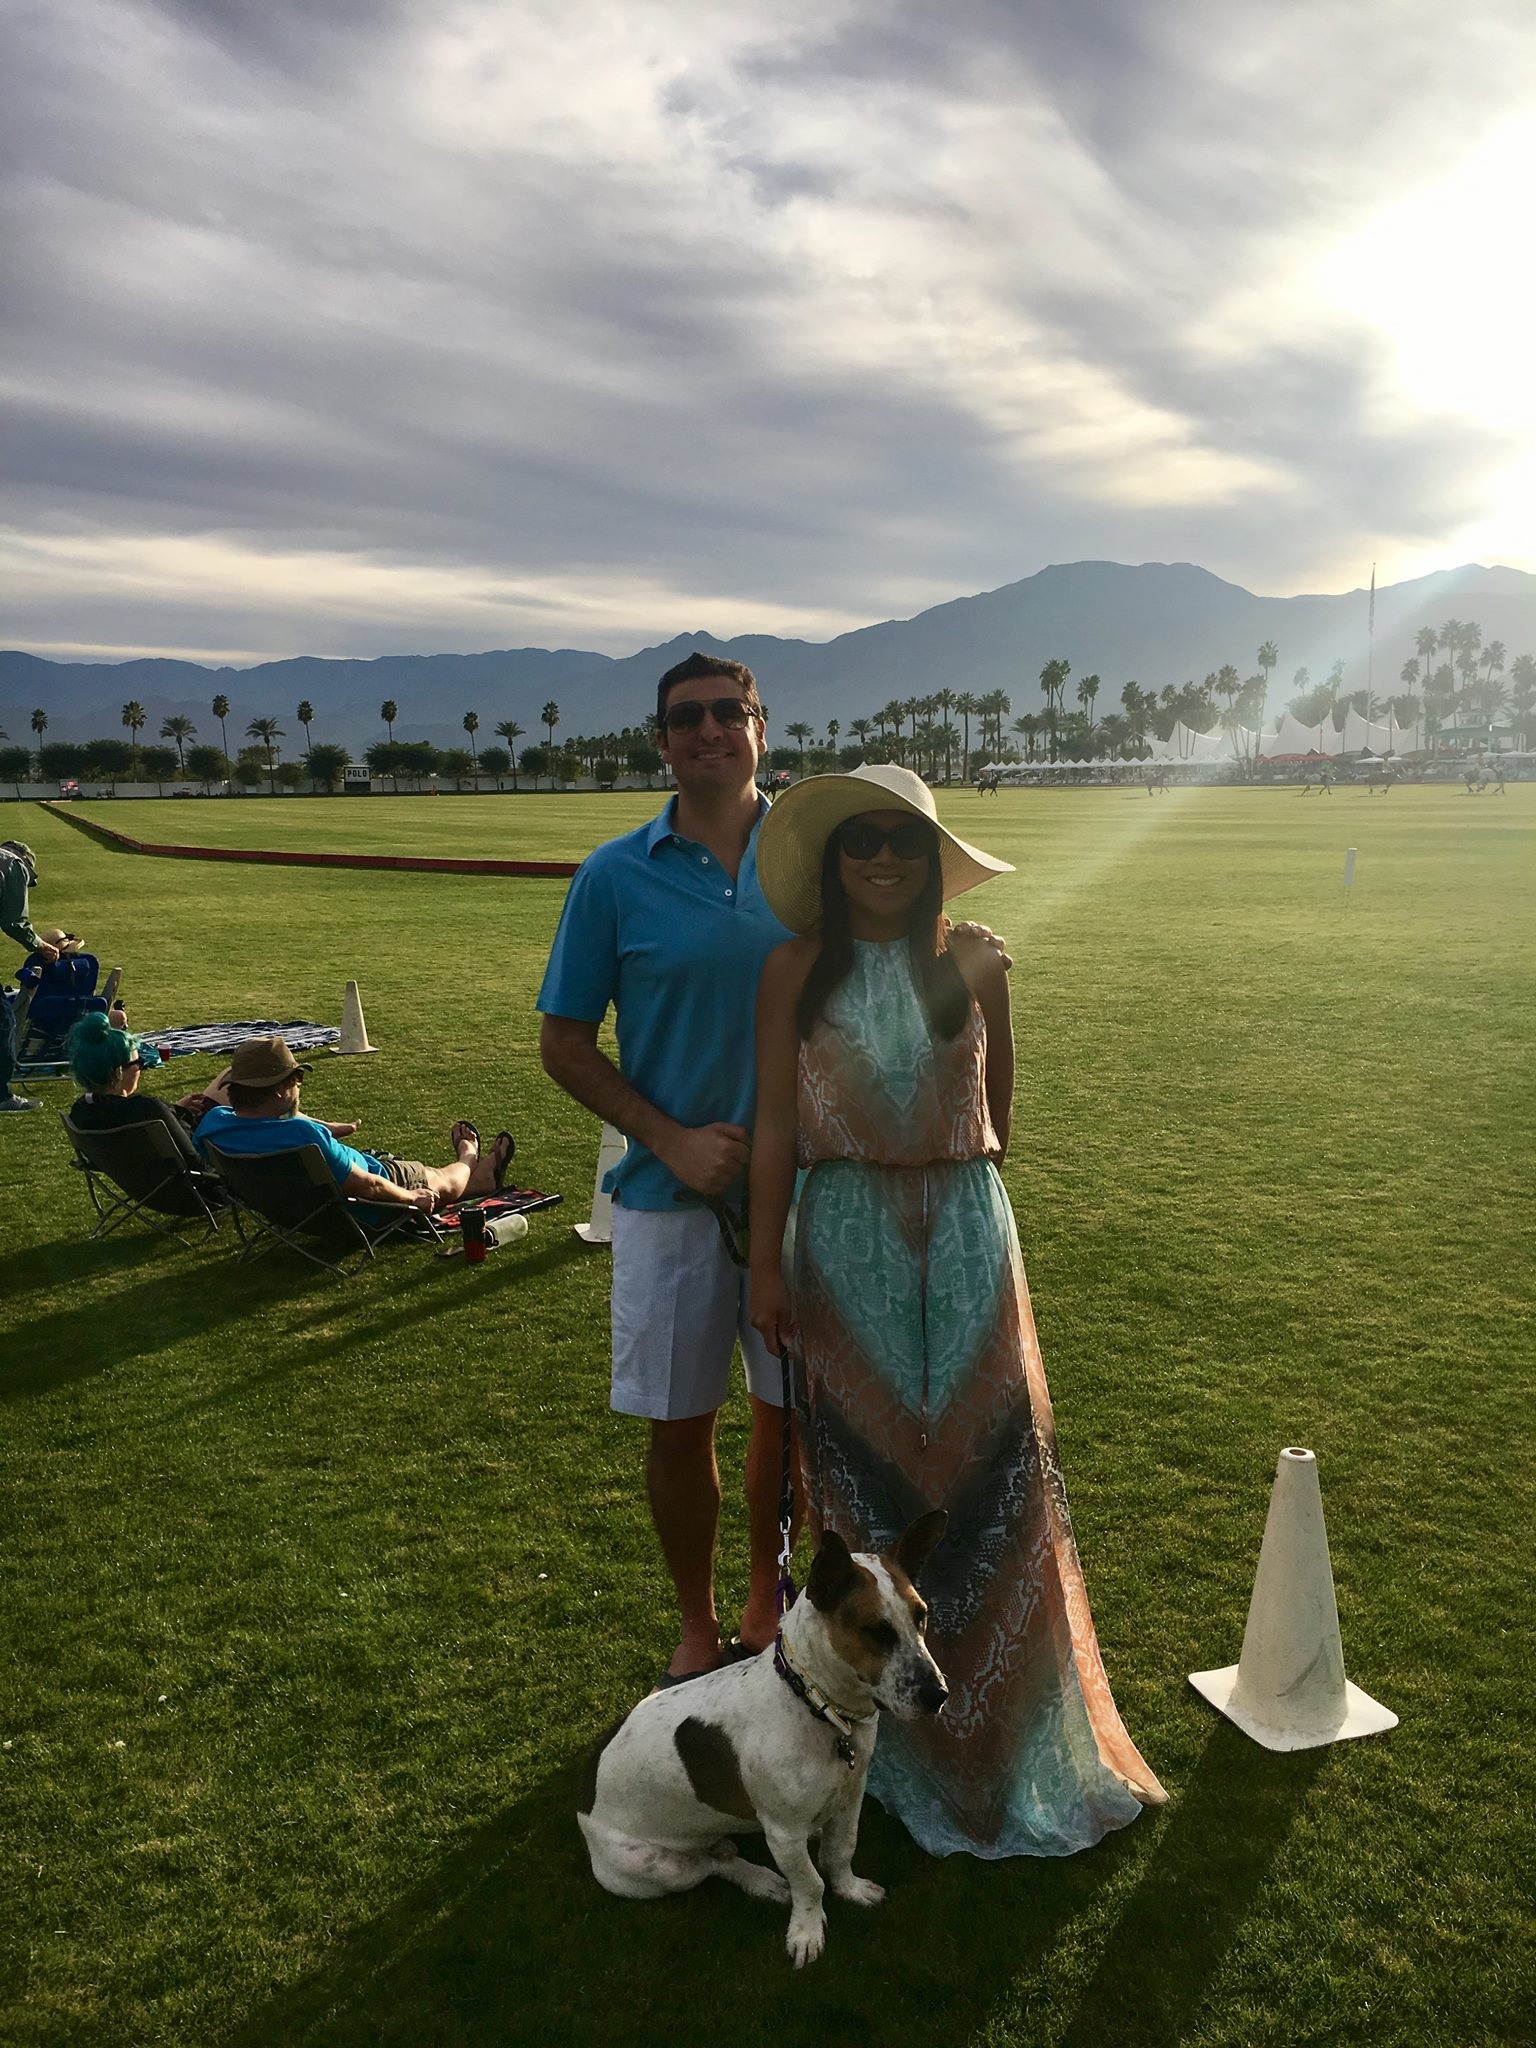 Here is Joel, Vannida, and Carl at the Empire Polo Fields